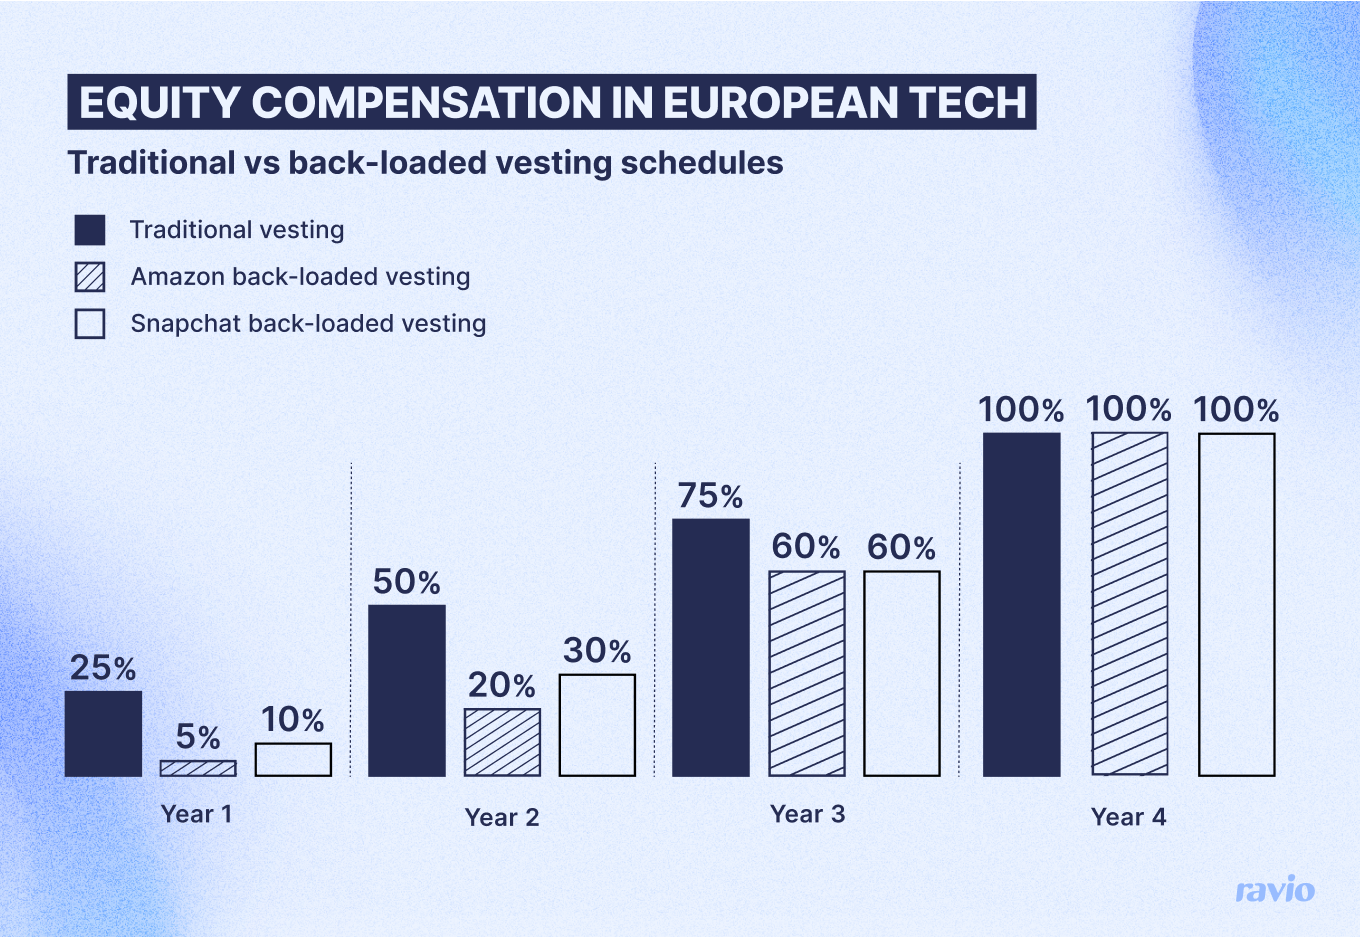 Chart showing traditional vs back-loaded vesting schedules